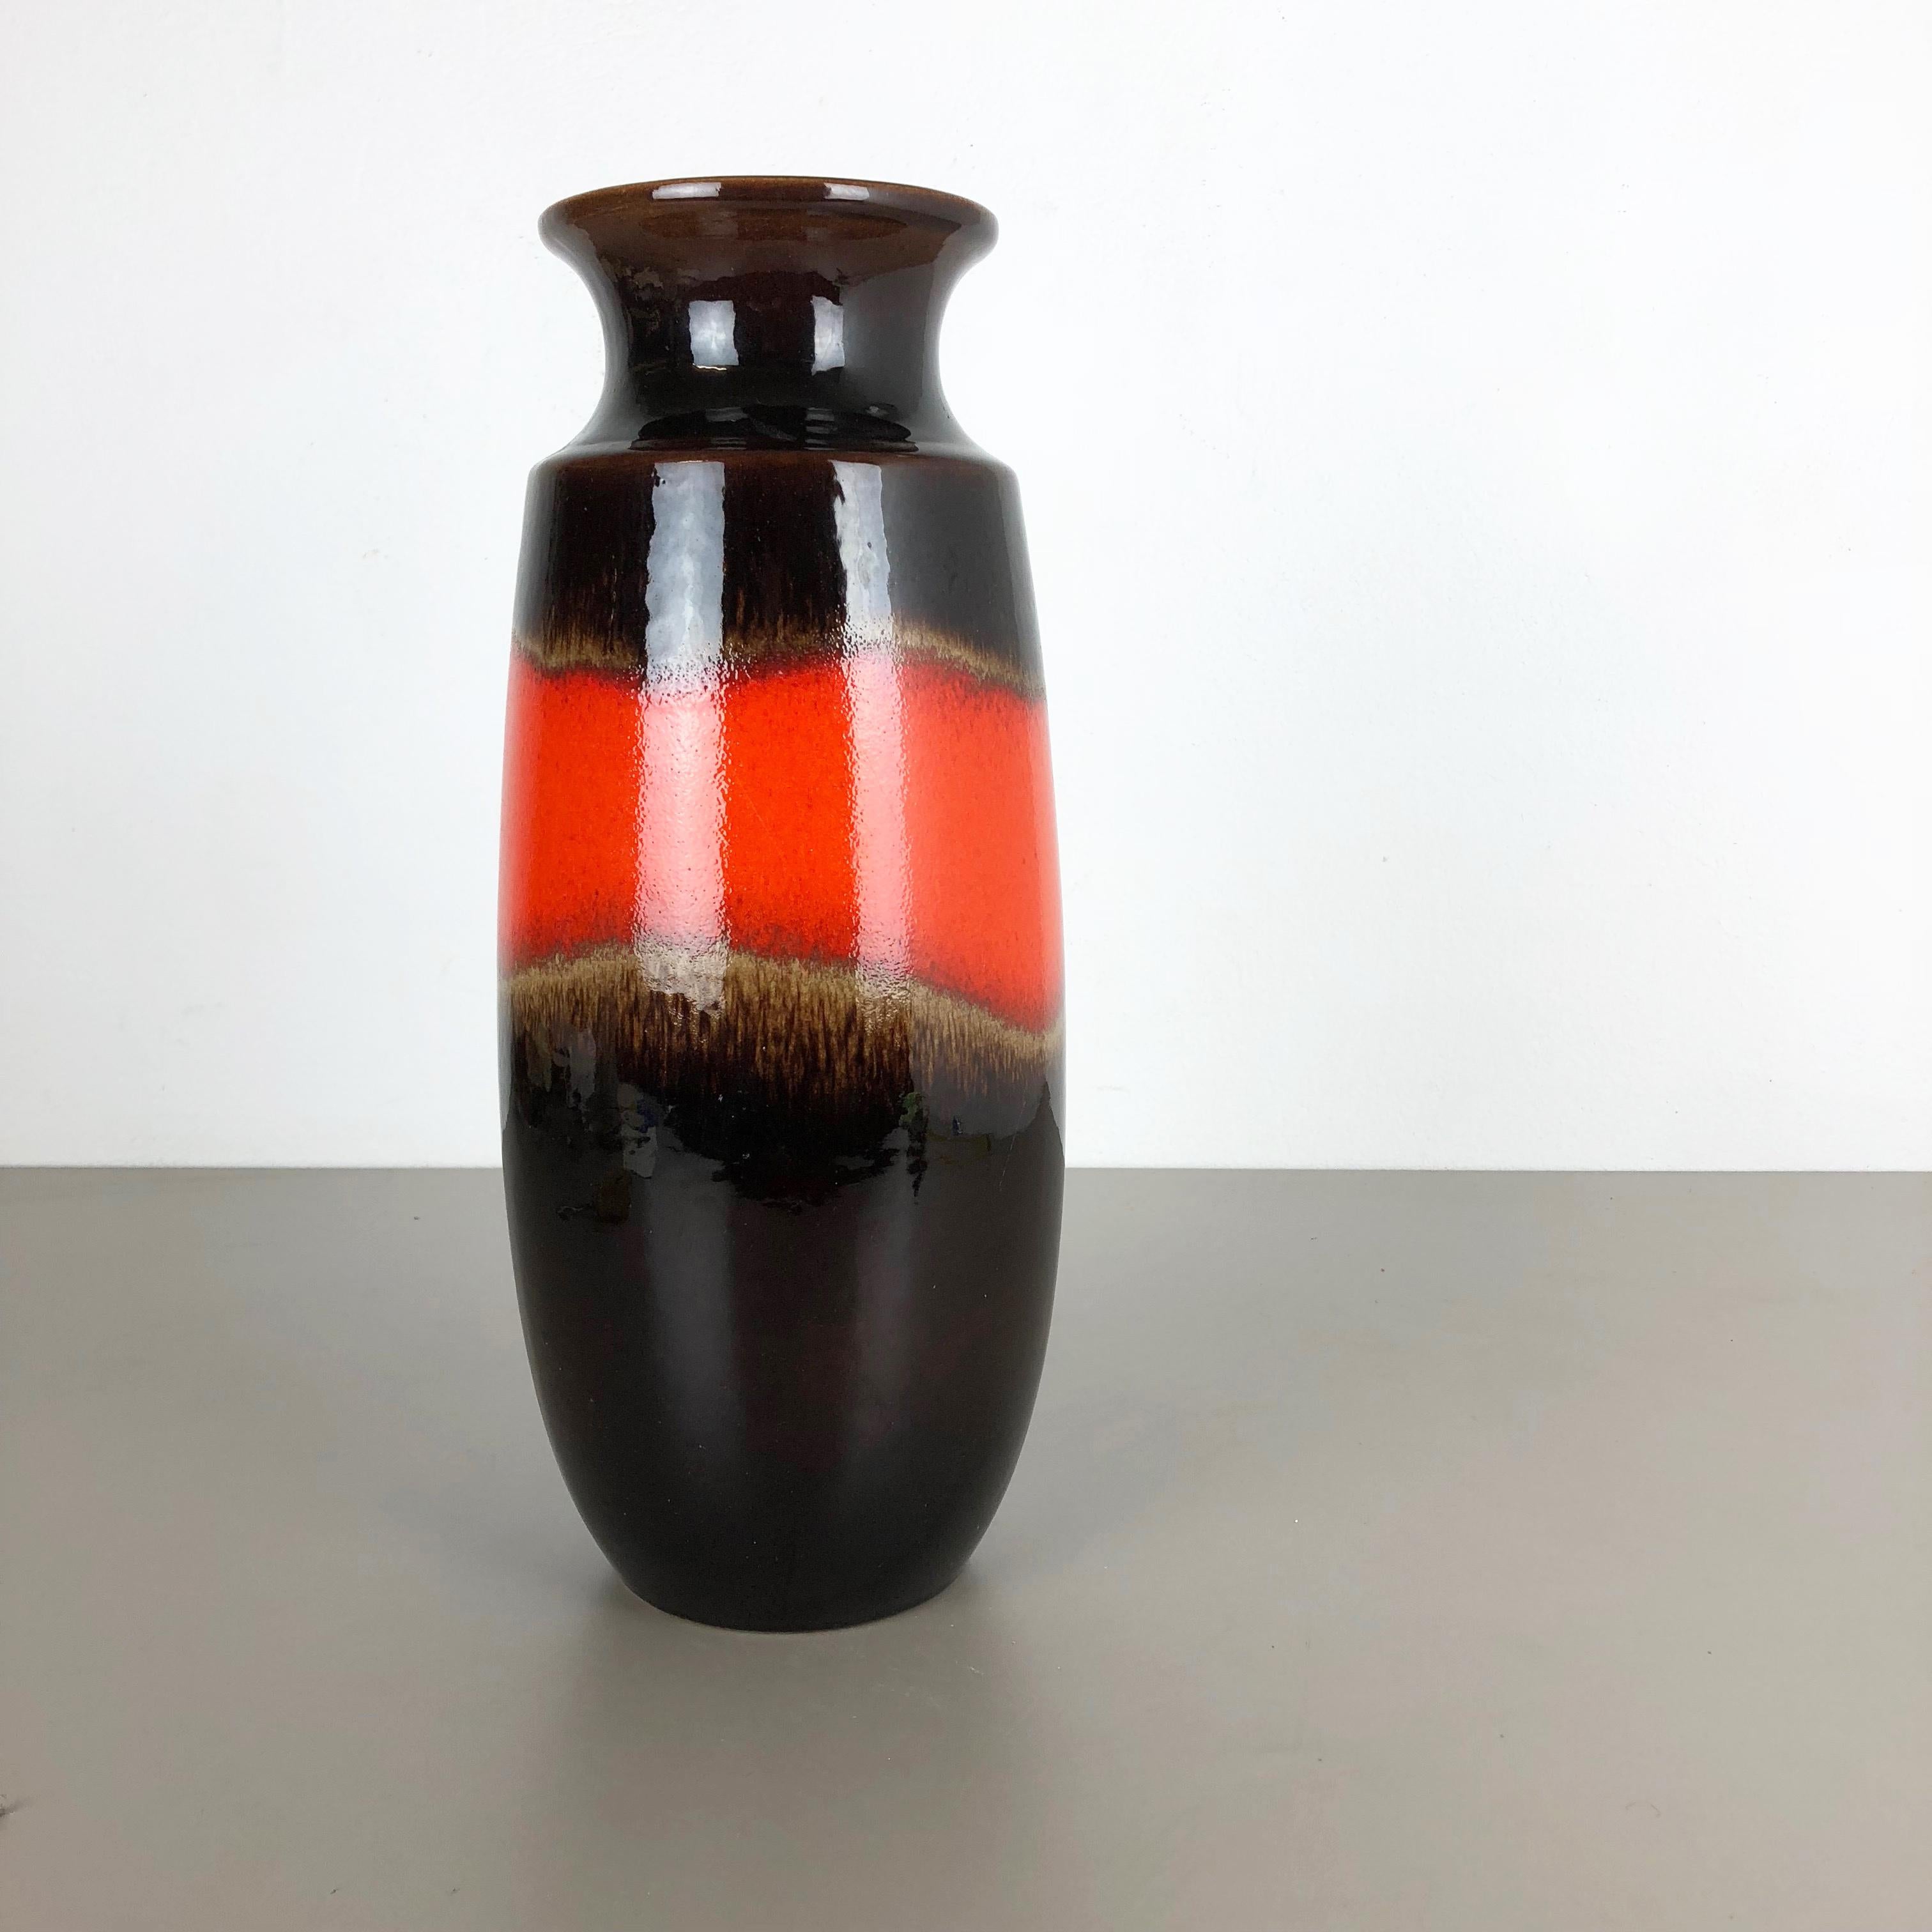 Article:

Fat lava art vase extra large version


Model: 238-41


Producer:

Scheurich, Germany



Decade:

1970s


Description:

This original vintage vase was produced in the 1970s in Germany. It is made of ceramic pottery in